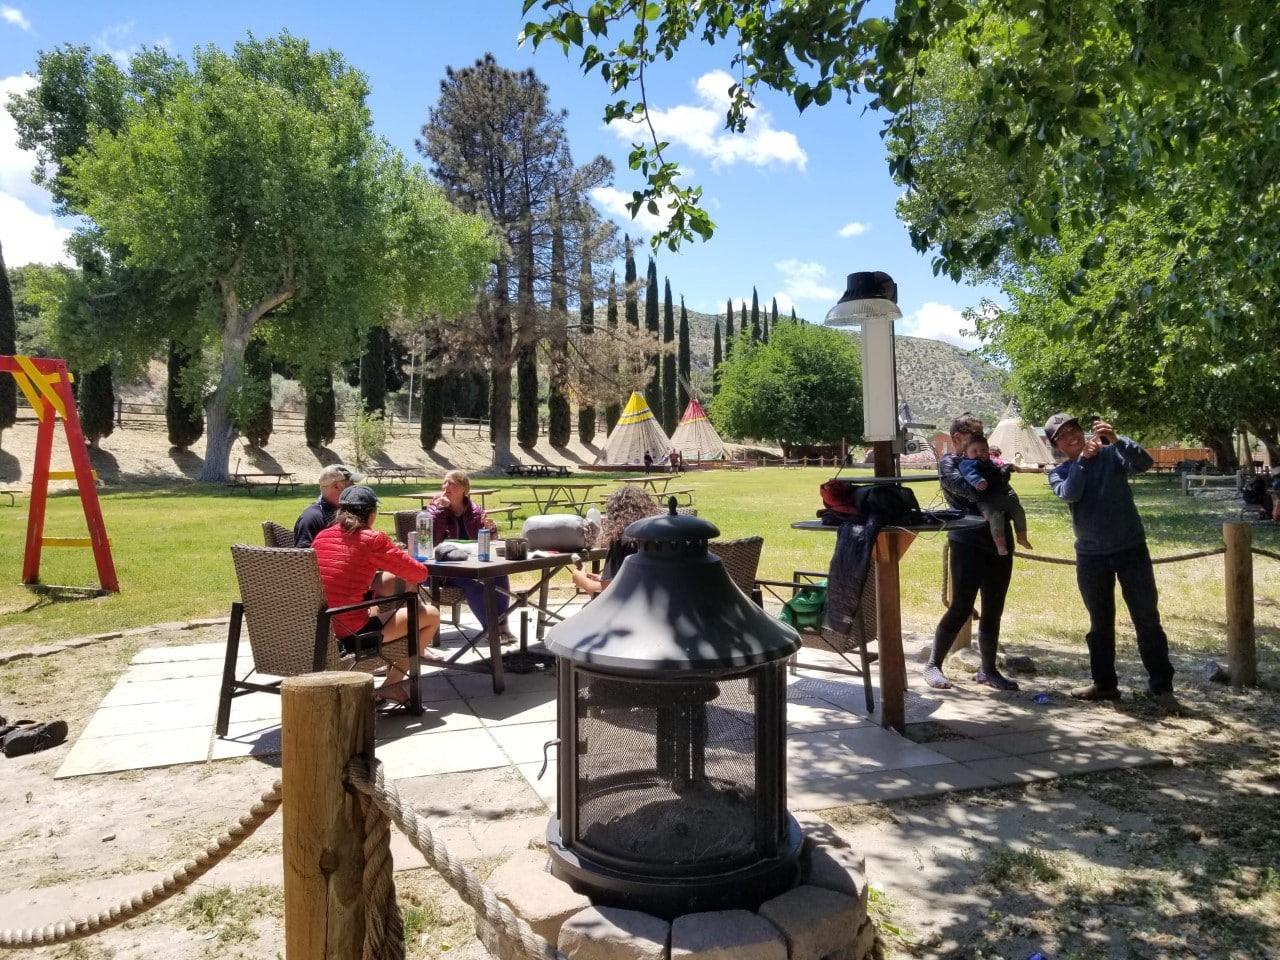 Campers relaxing at a picnic table with with tepees in the background.